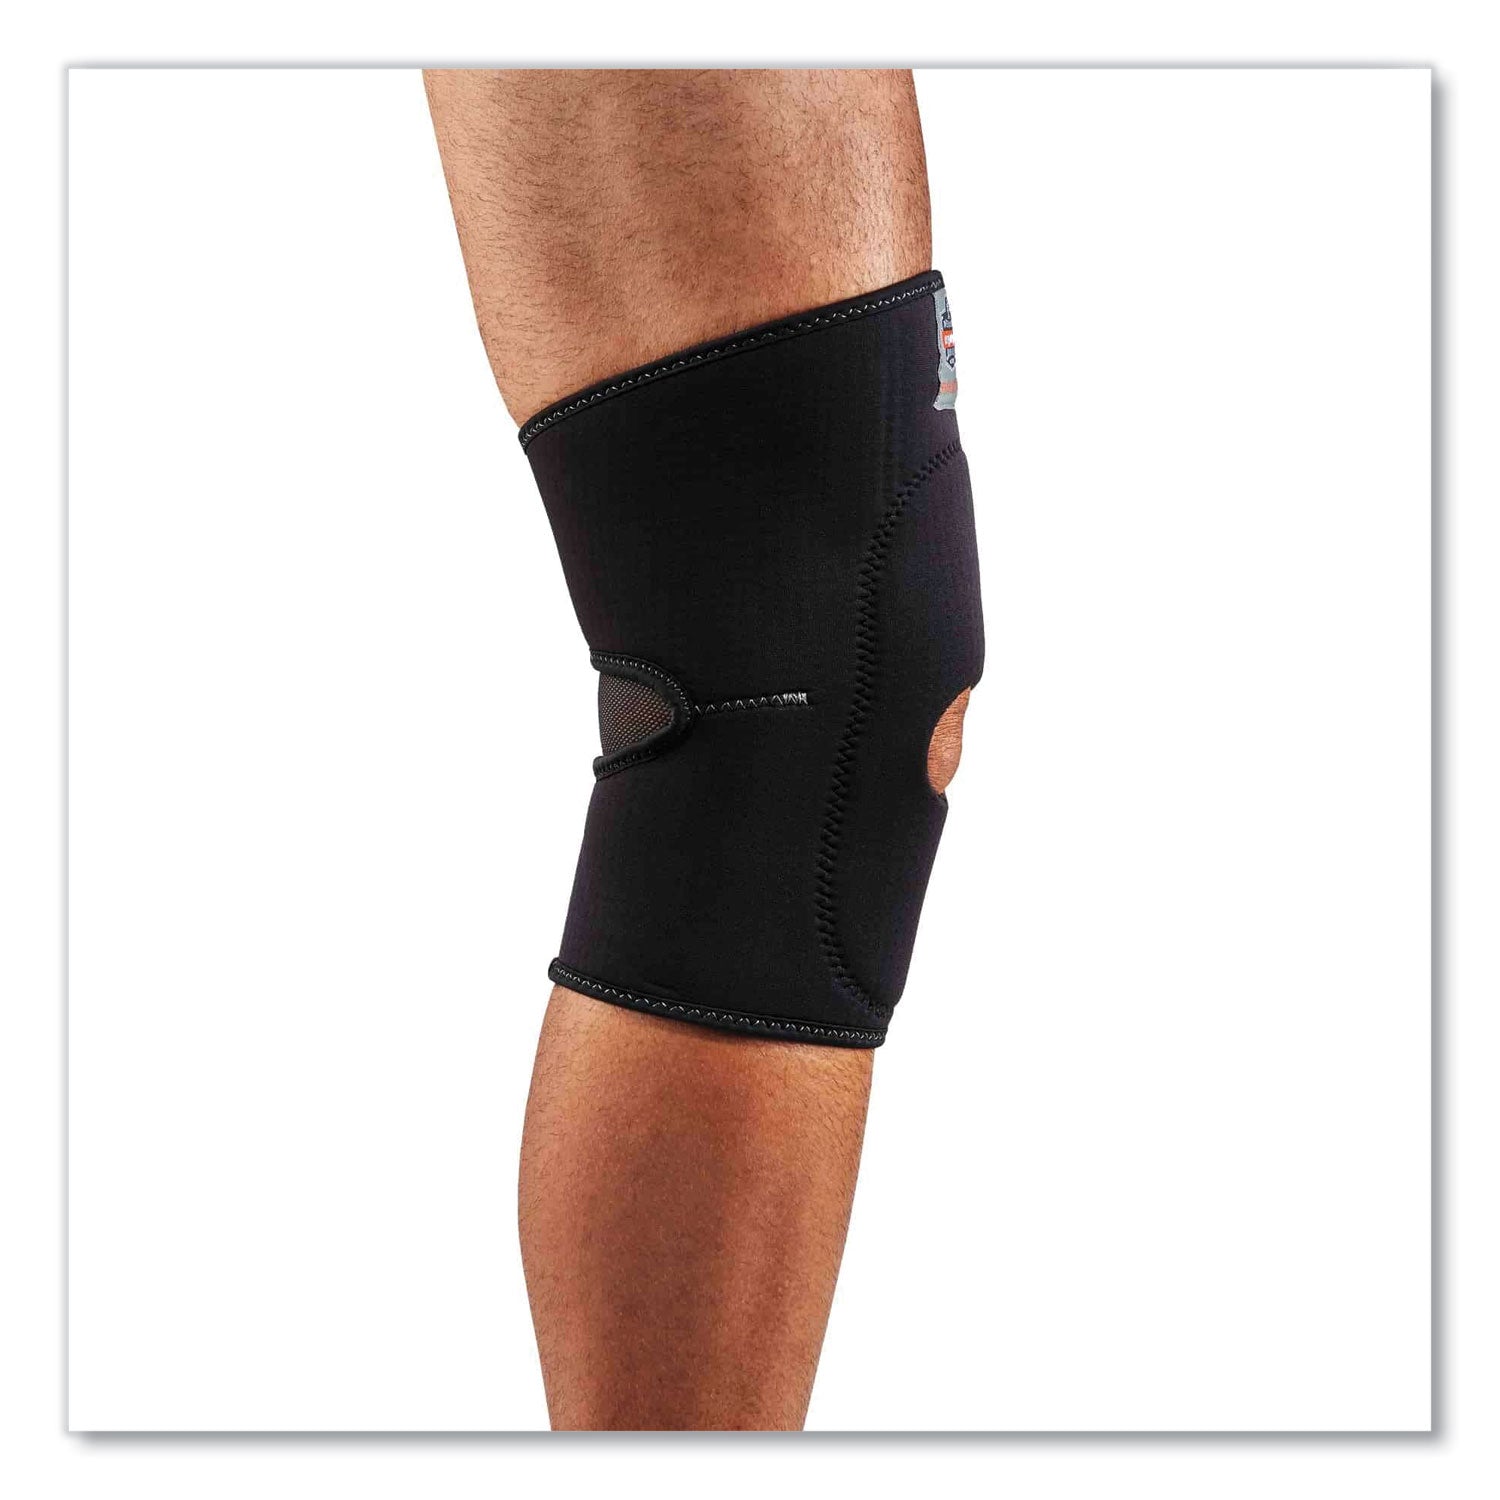 proflex-615-open-patella-anterior-pad-knee-sleeve-small-black-ships-in-1-3-business-days_ego16532 - 2